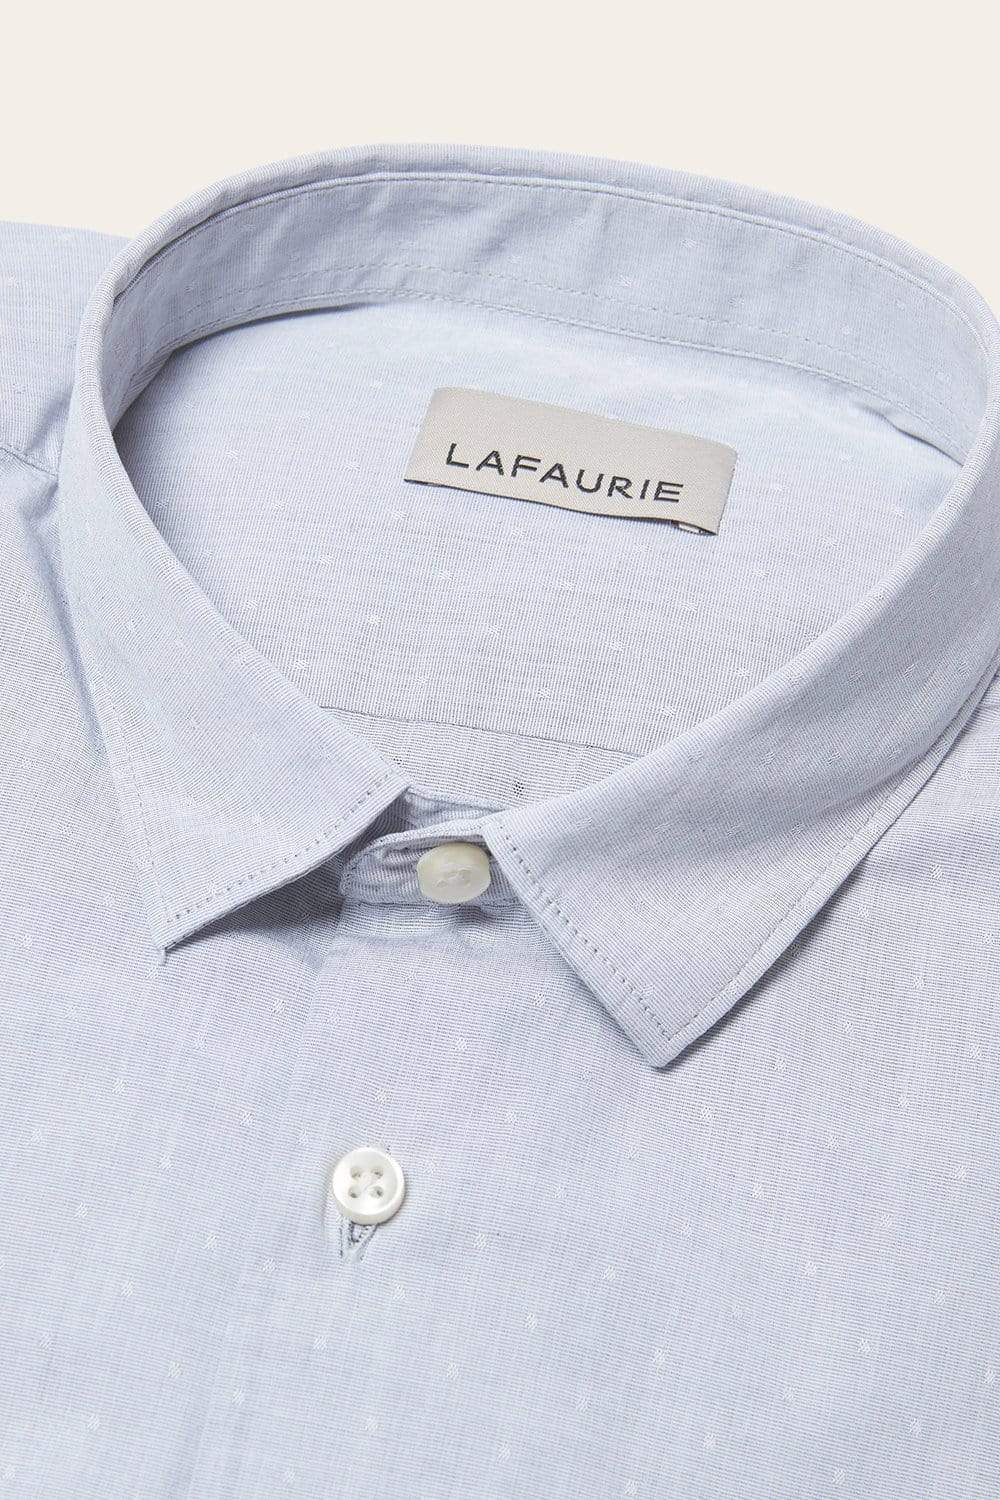 Chemise Tracy - Gris - Lafaurie